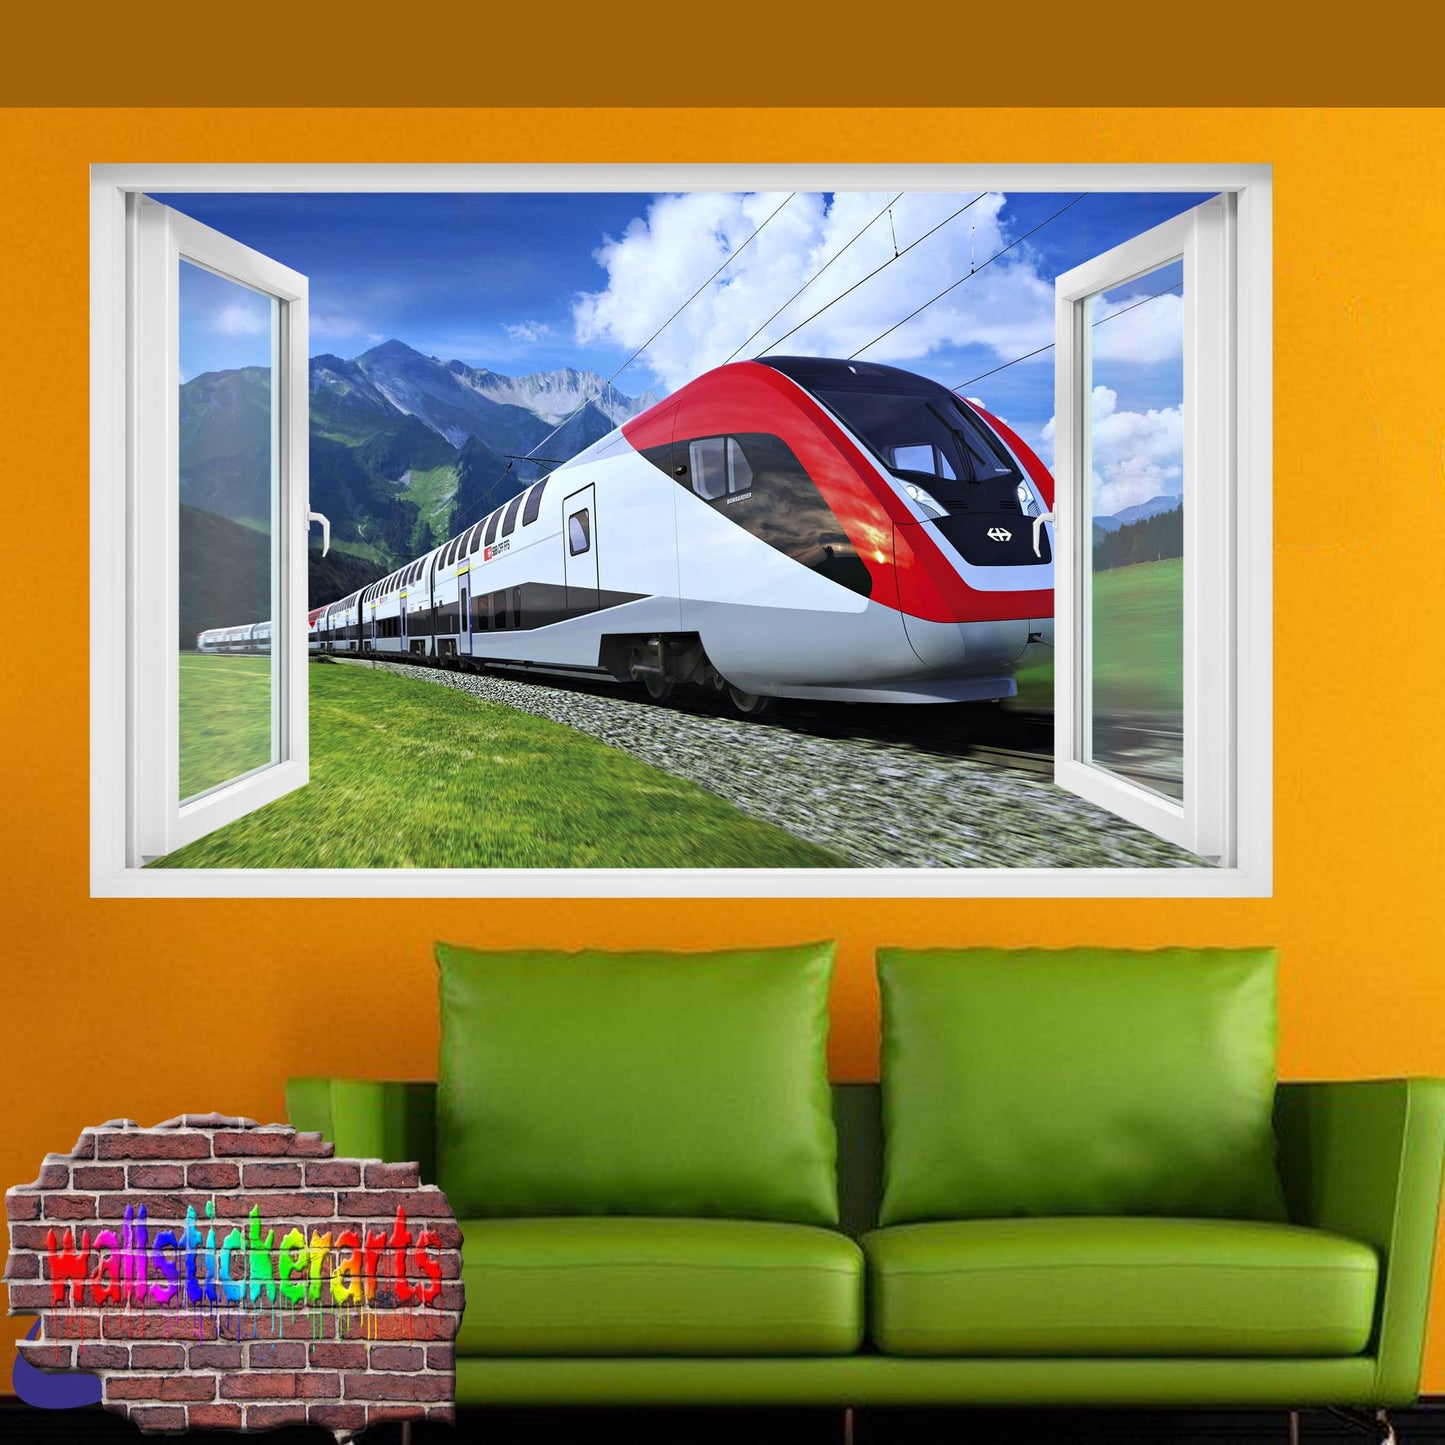 Fast Track Modern Train 3d Art Smashed Effect Wall Sticker Room Office Nursery Shop Decoration Decal Mural XH0